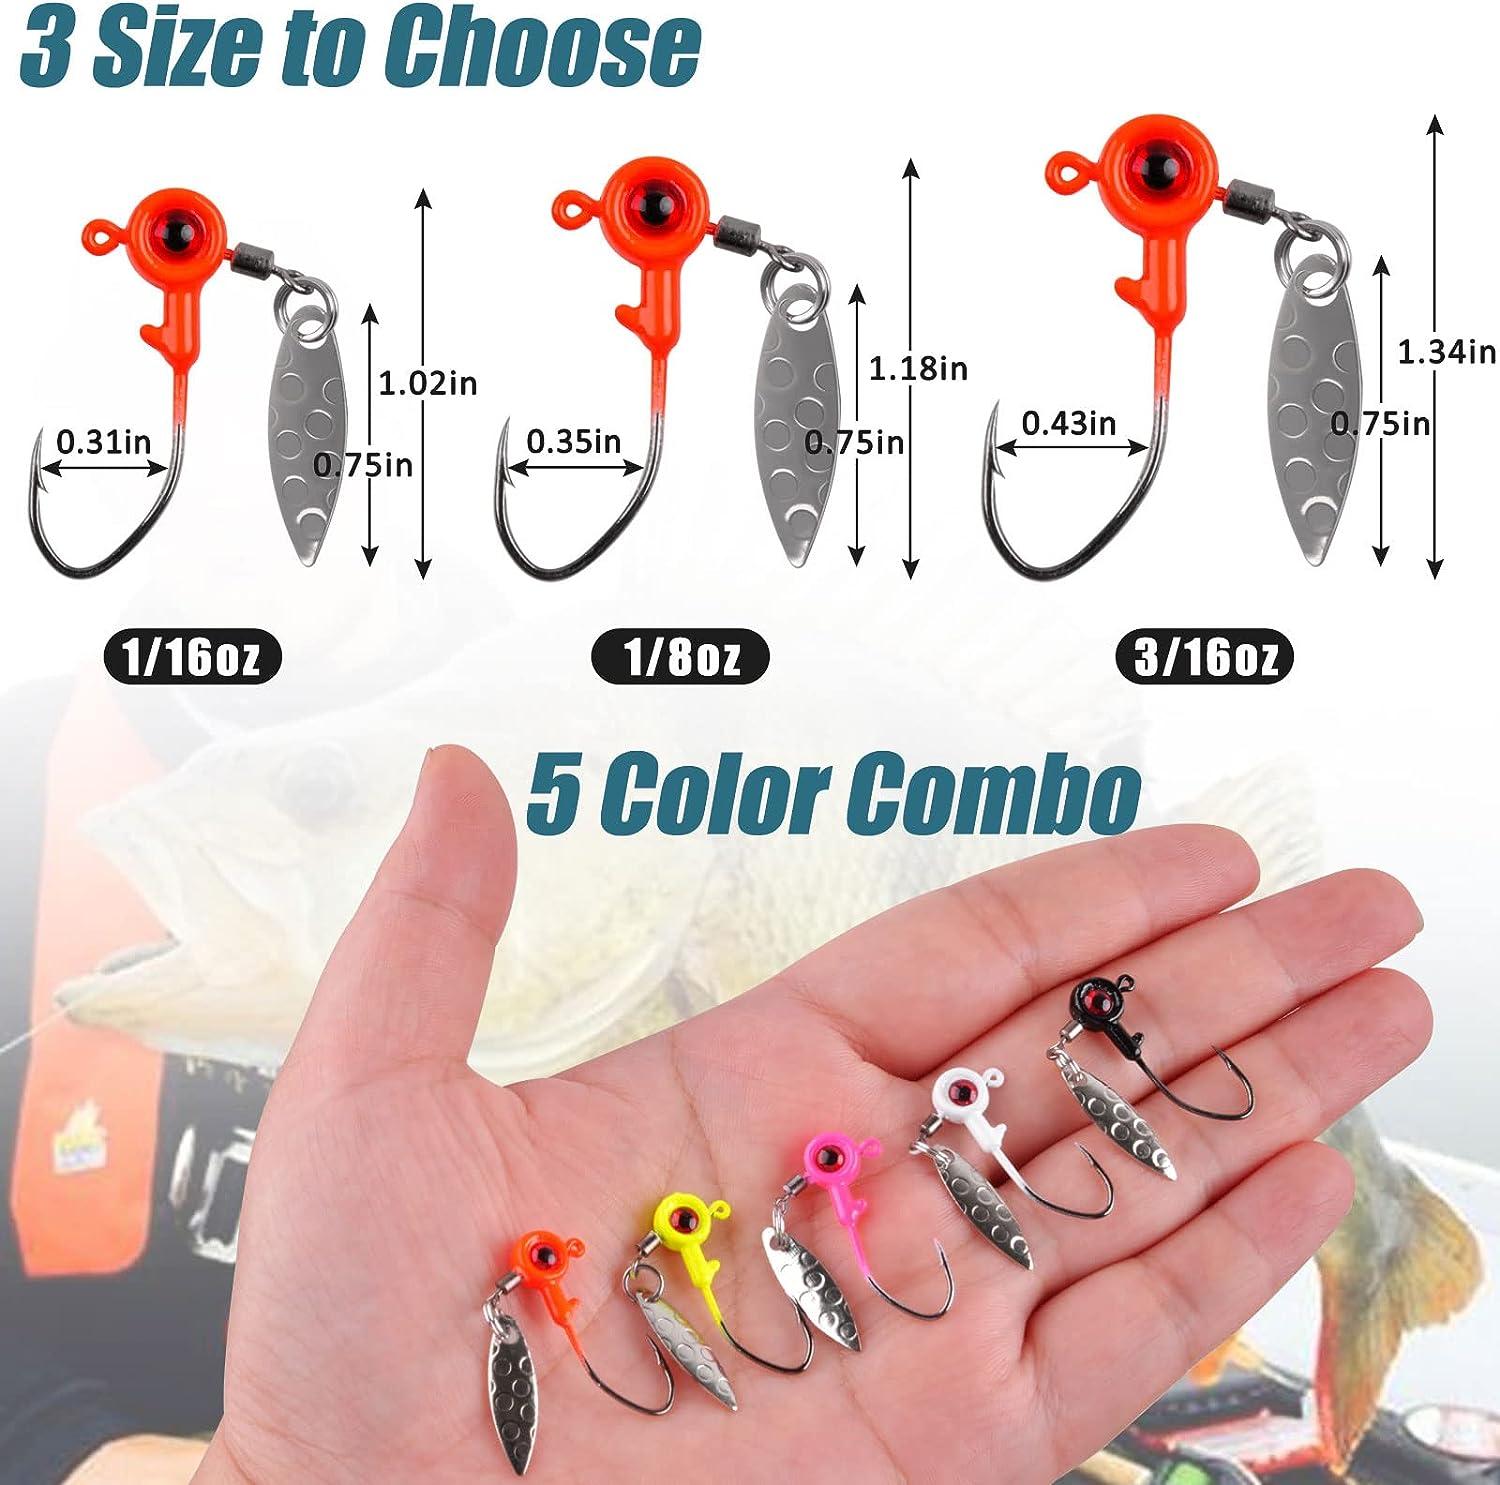 Jig Heads Fishing Hooks Crappie Jig Heads Unpainted Jig Heads Round Ball  Sharp Fishing Jig Hooks for Bass Trout Crappie Walleye Fishing Saltwater